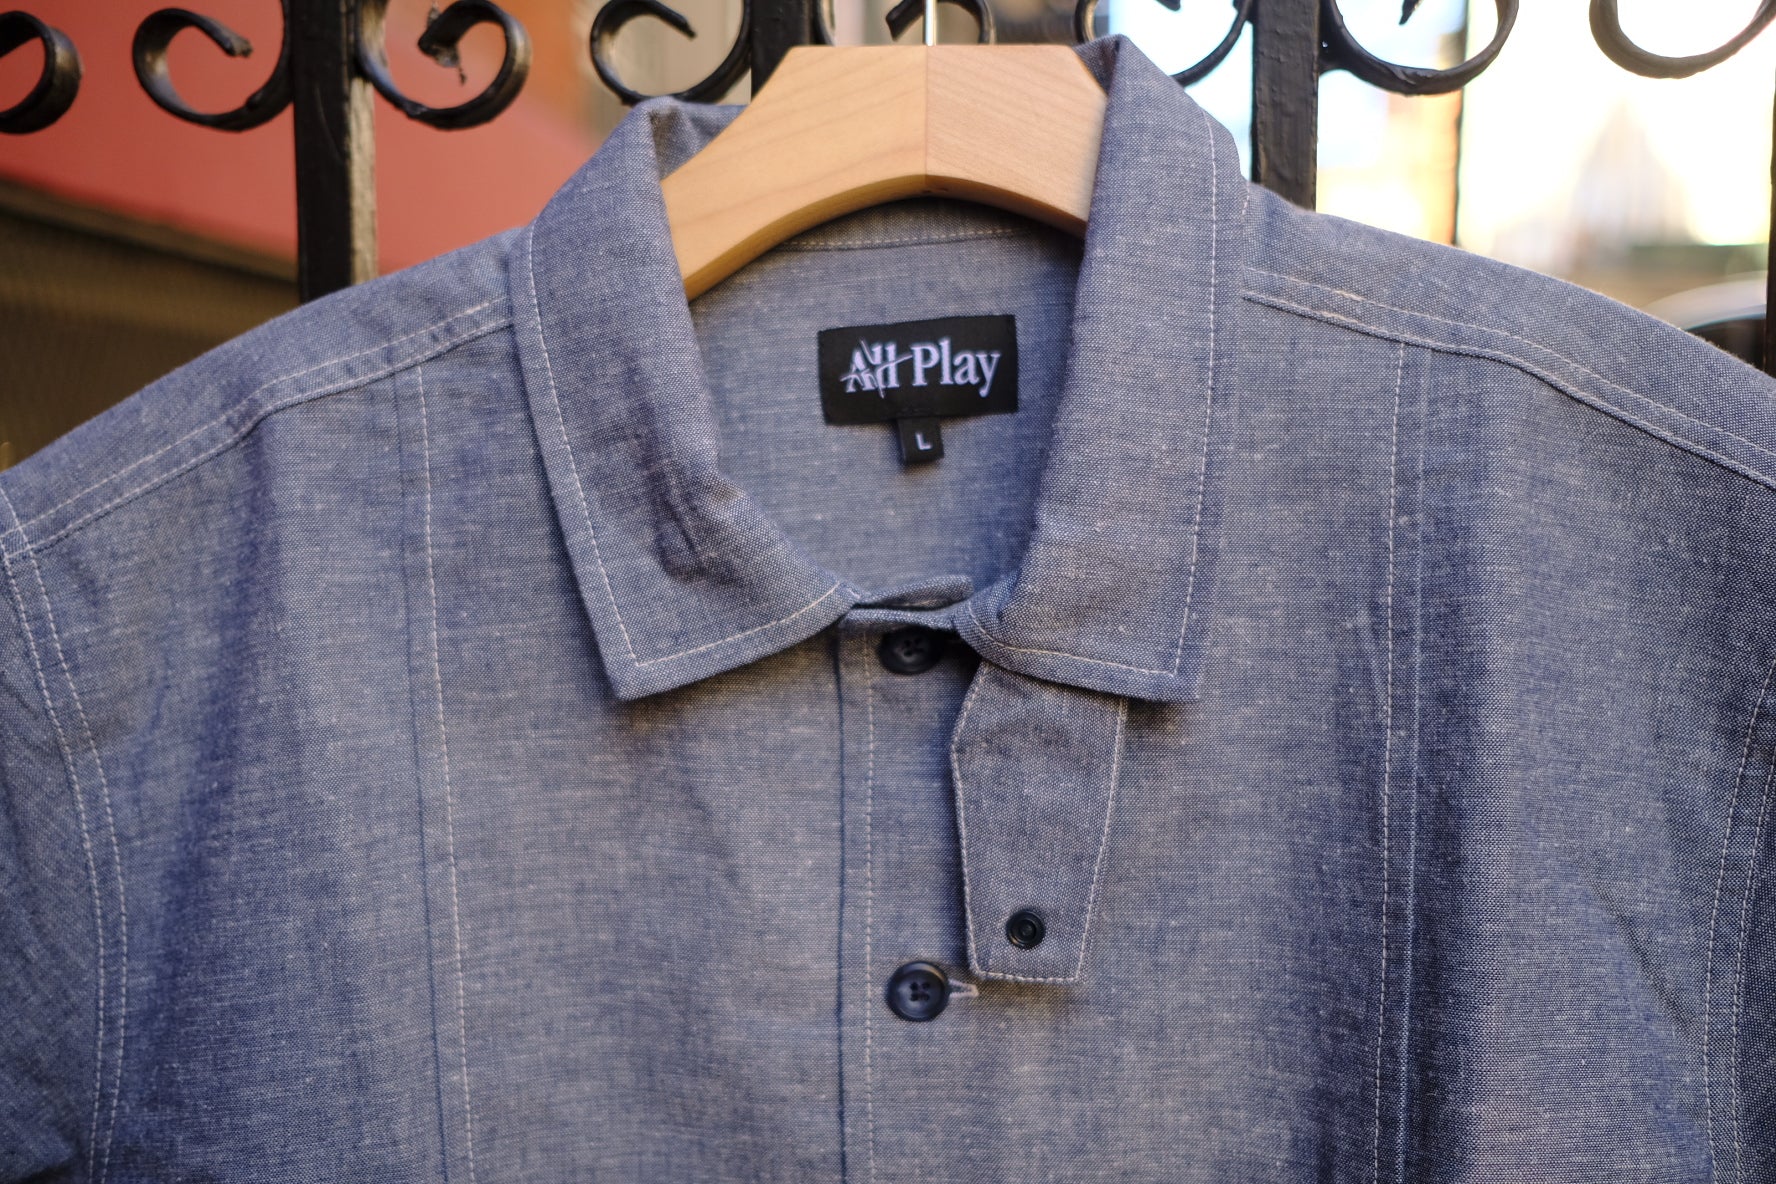 chelsea camp collar shirt in chambray